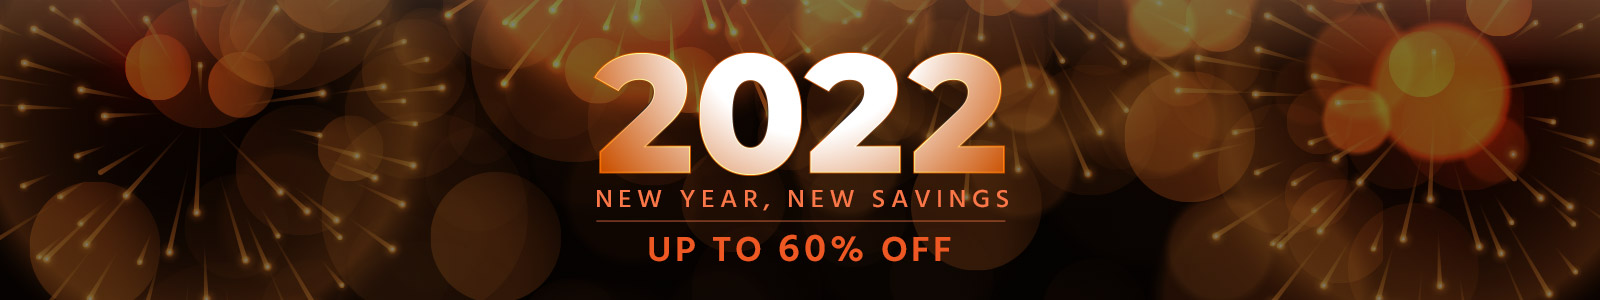 2022
New Year, New Savings
Up to 60% off
Shop Now